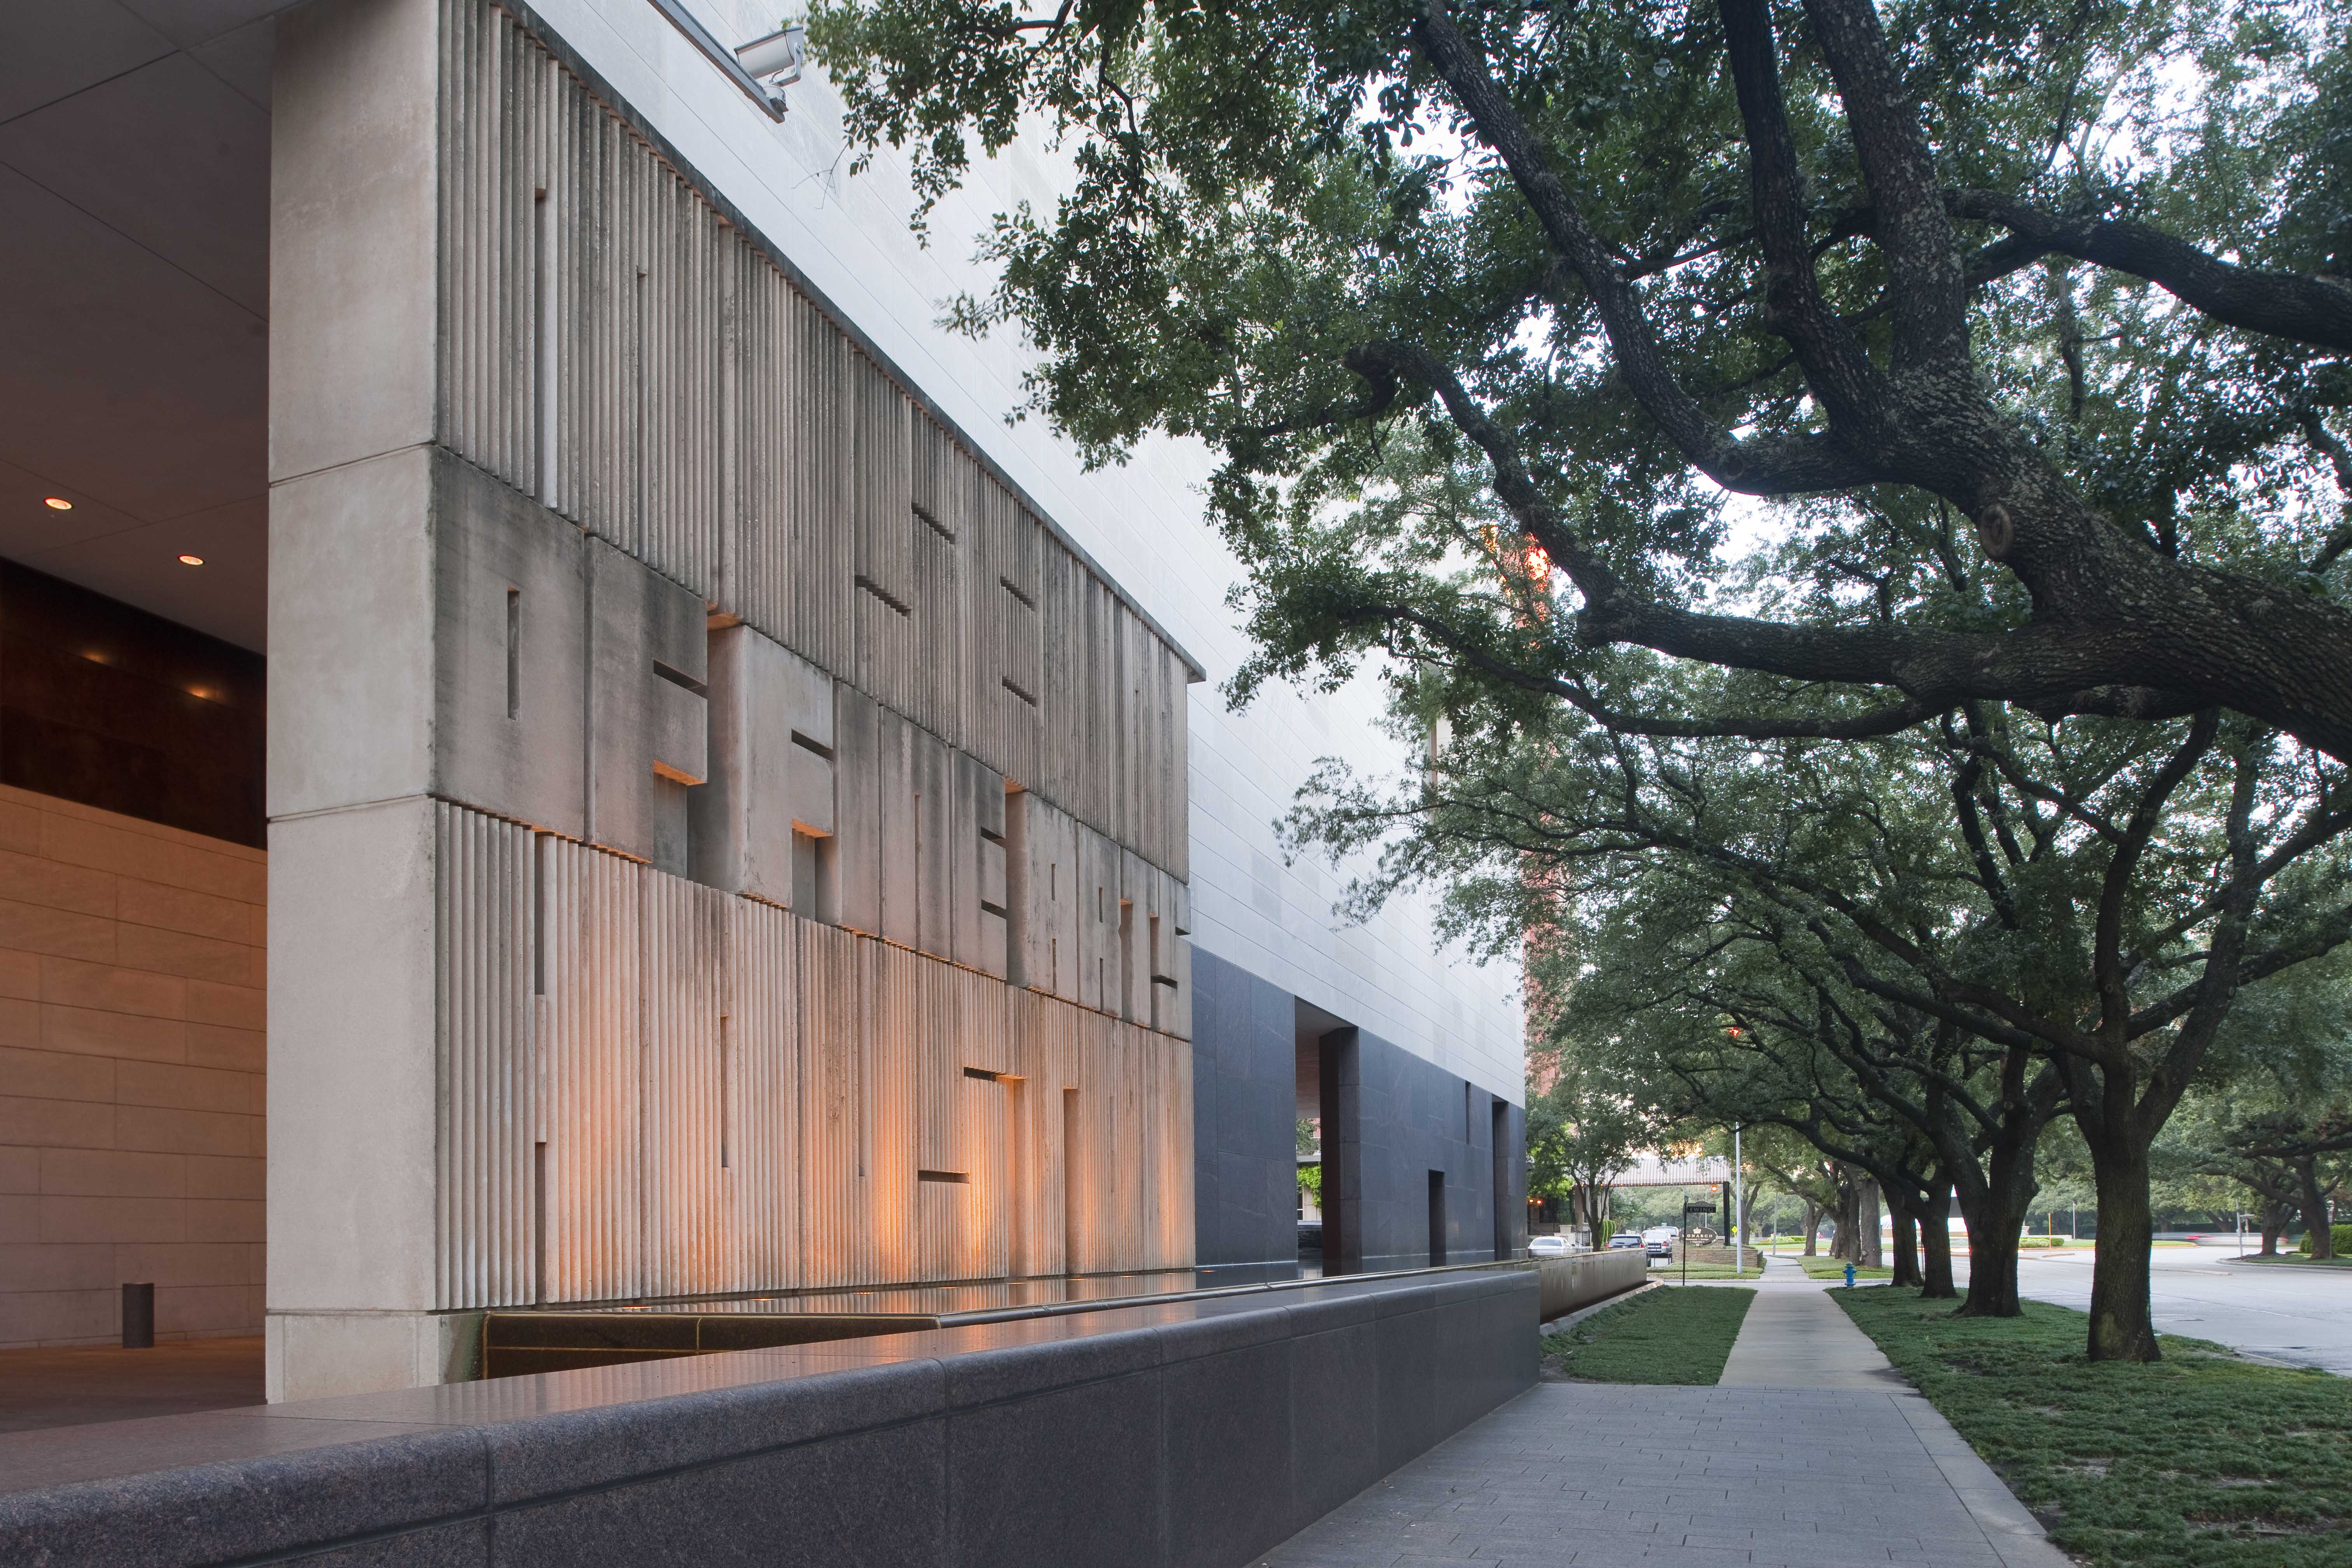 MFAH_Beck Building exterior; Photo by Robb Williamson